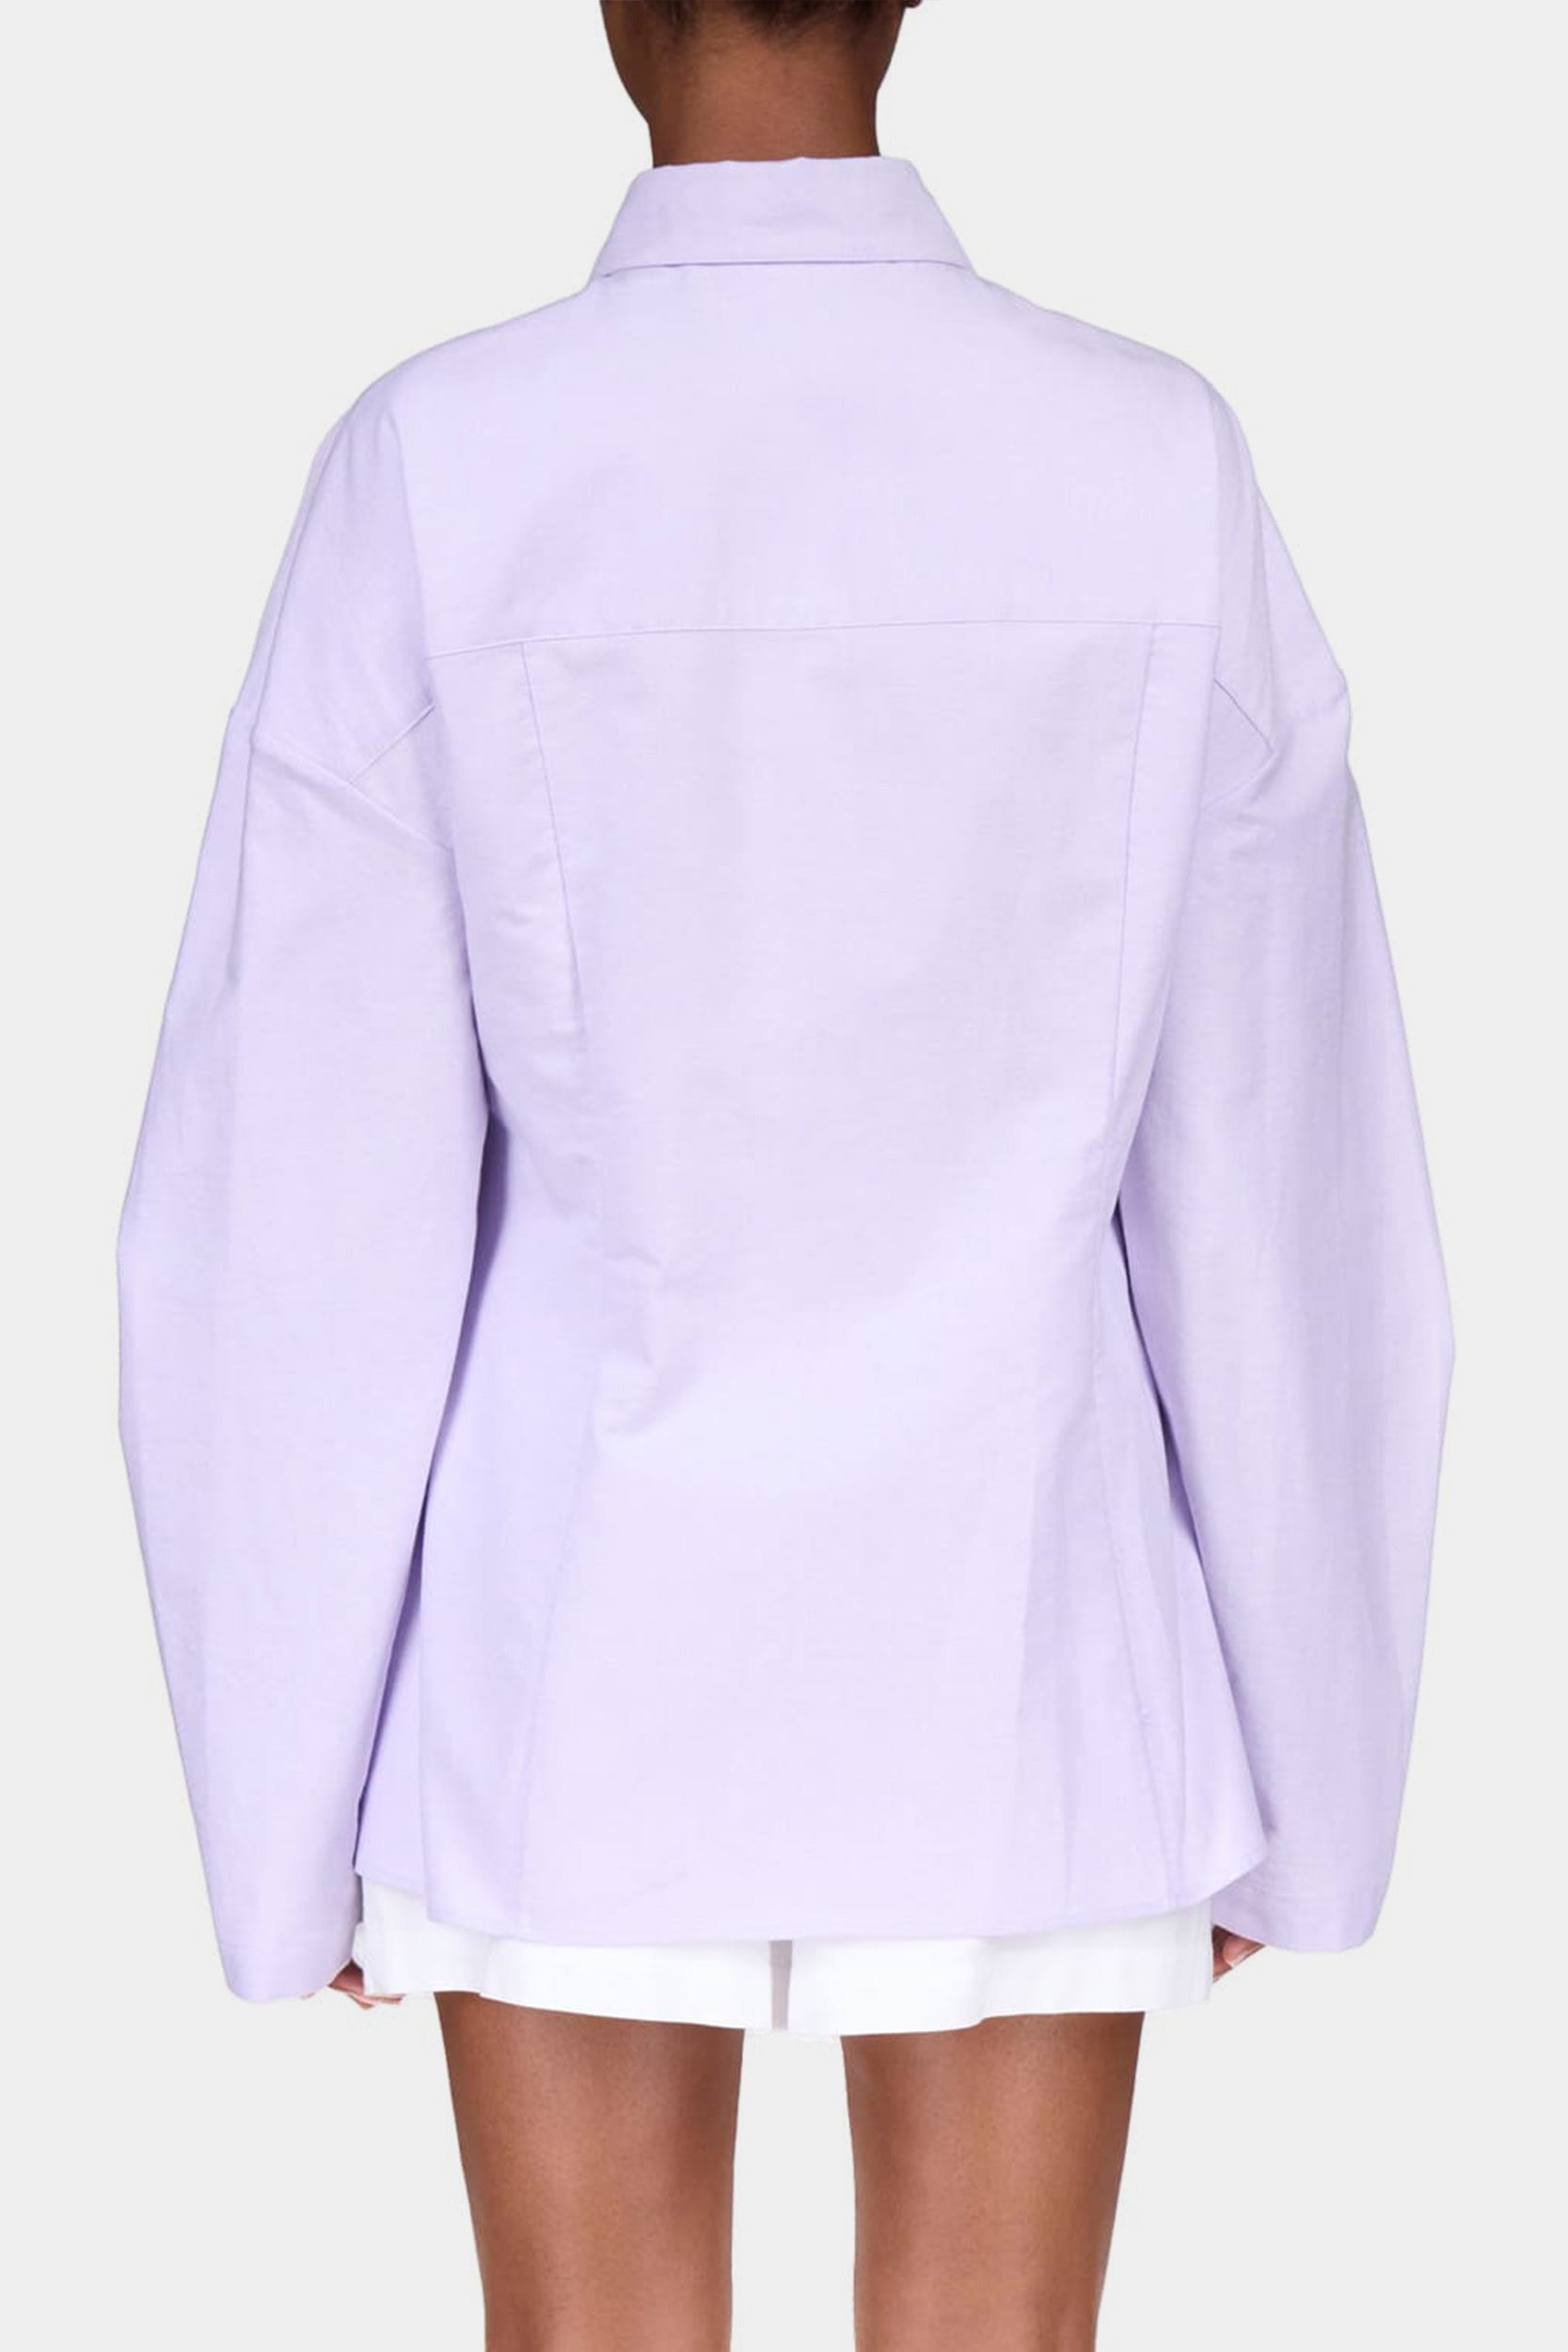 Oxford Laced Button Down in Lilac